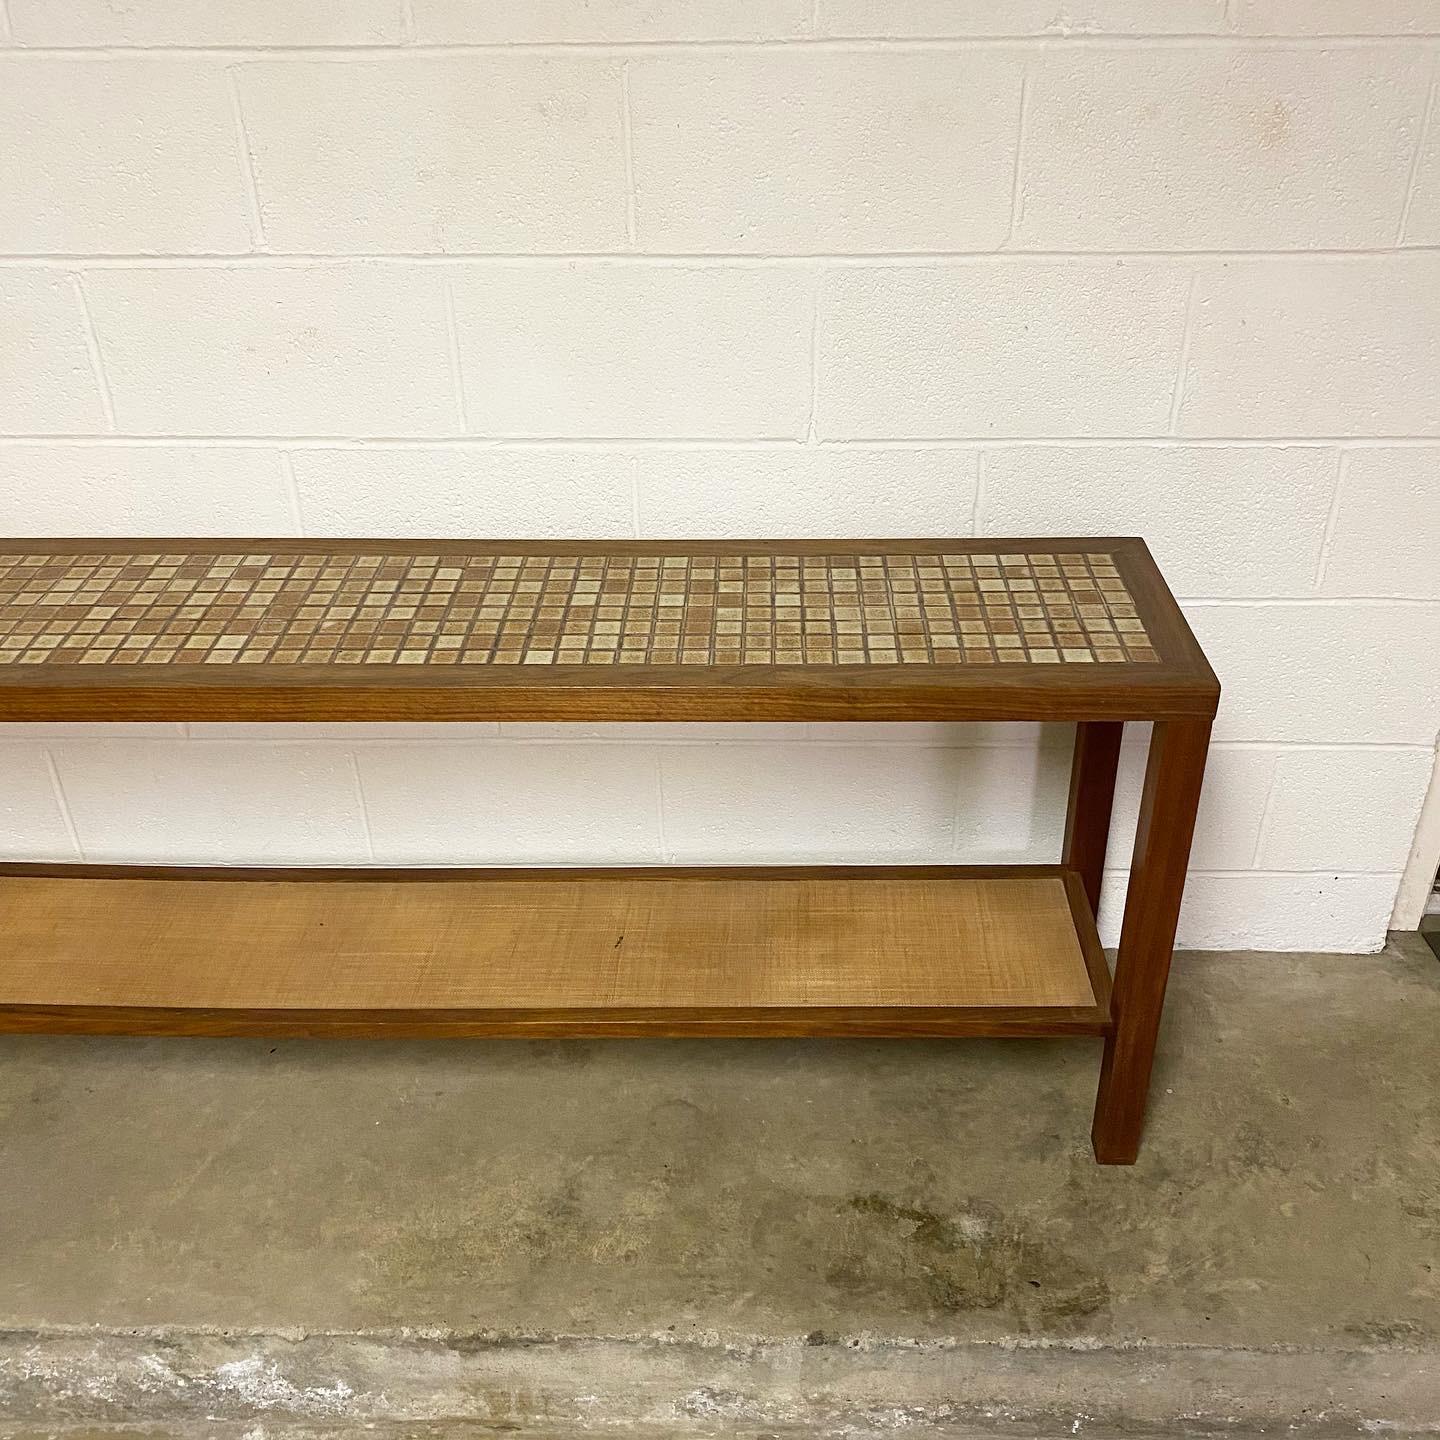 This is an exceptionally rare sofa table designed by Jane and Gordon Martz for their company Marshall Studios, ca 1970's. The handmade and hand-laid tile along with the beautifully selected walnut work well with the cane bottom shelf. Even the